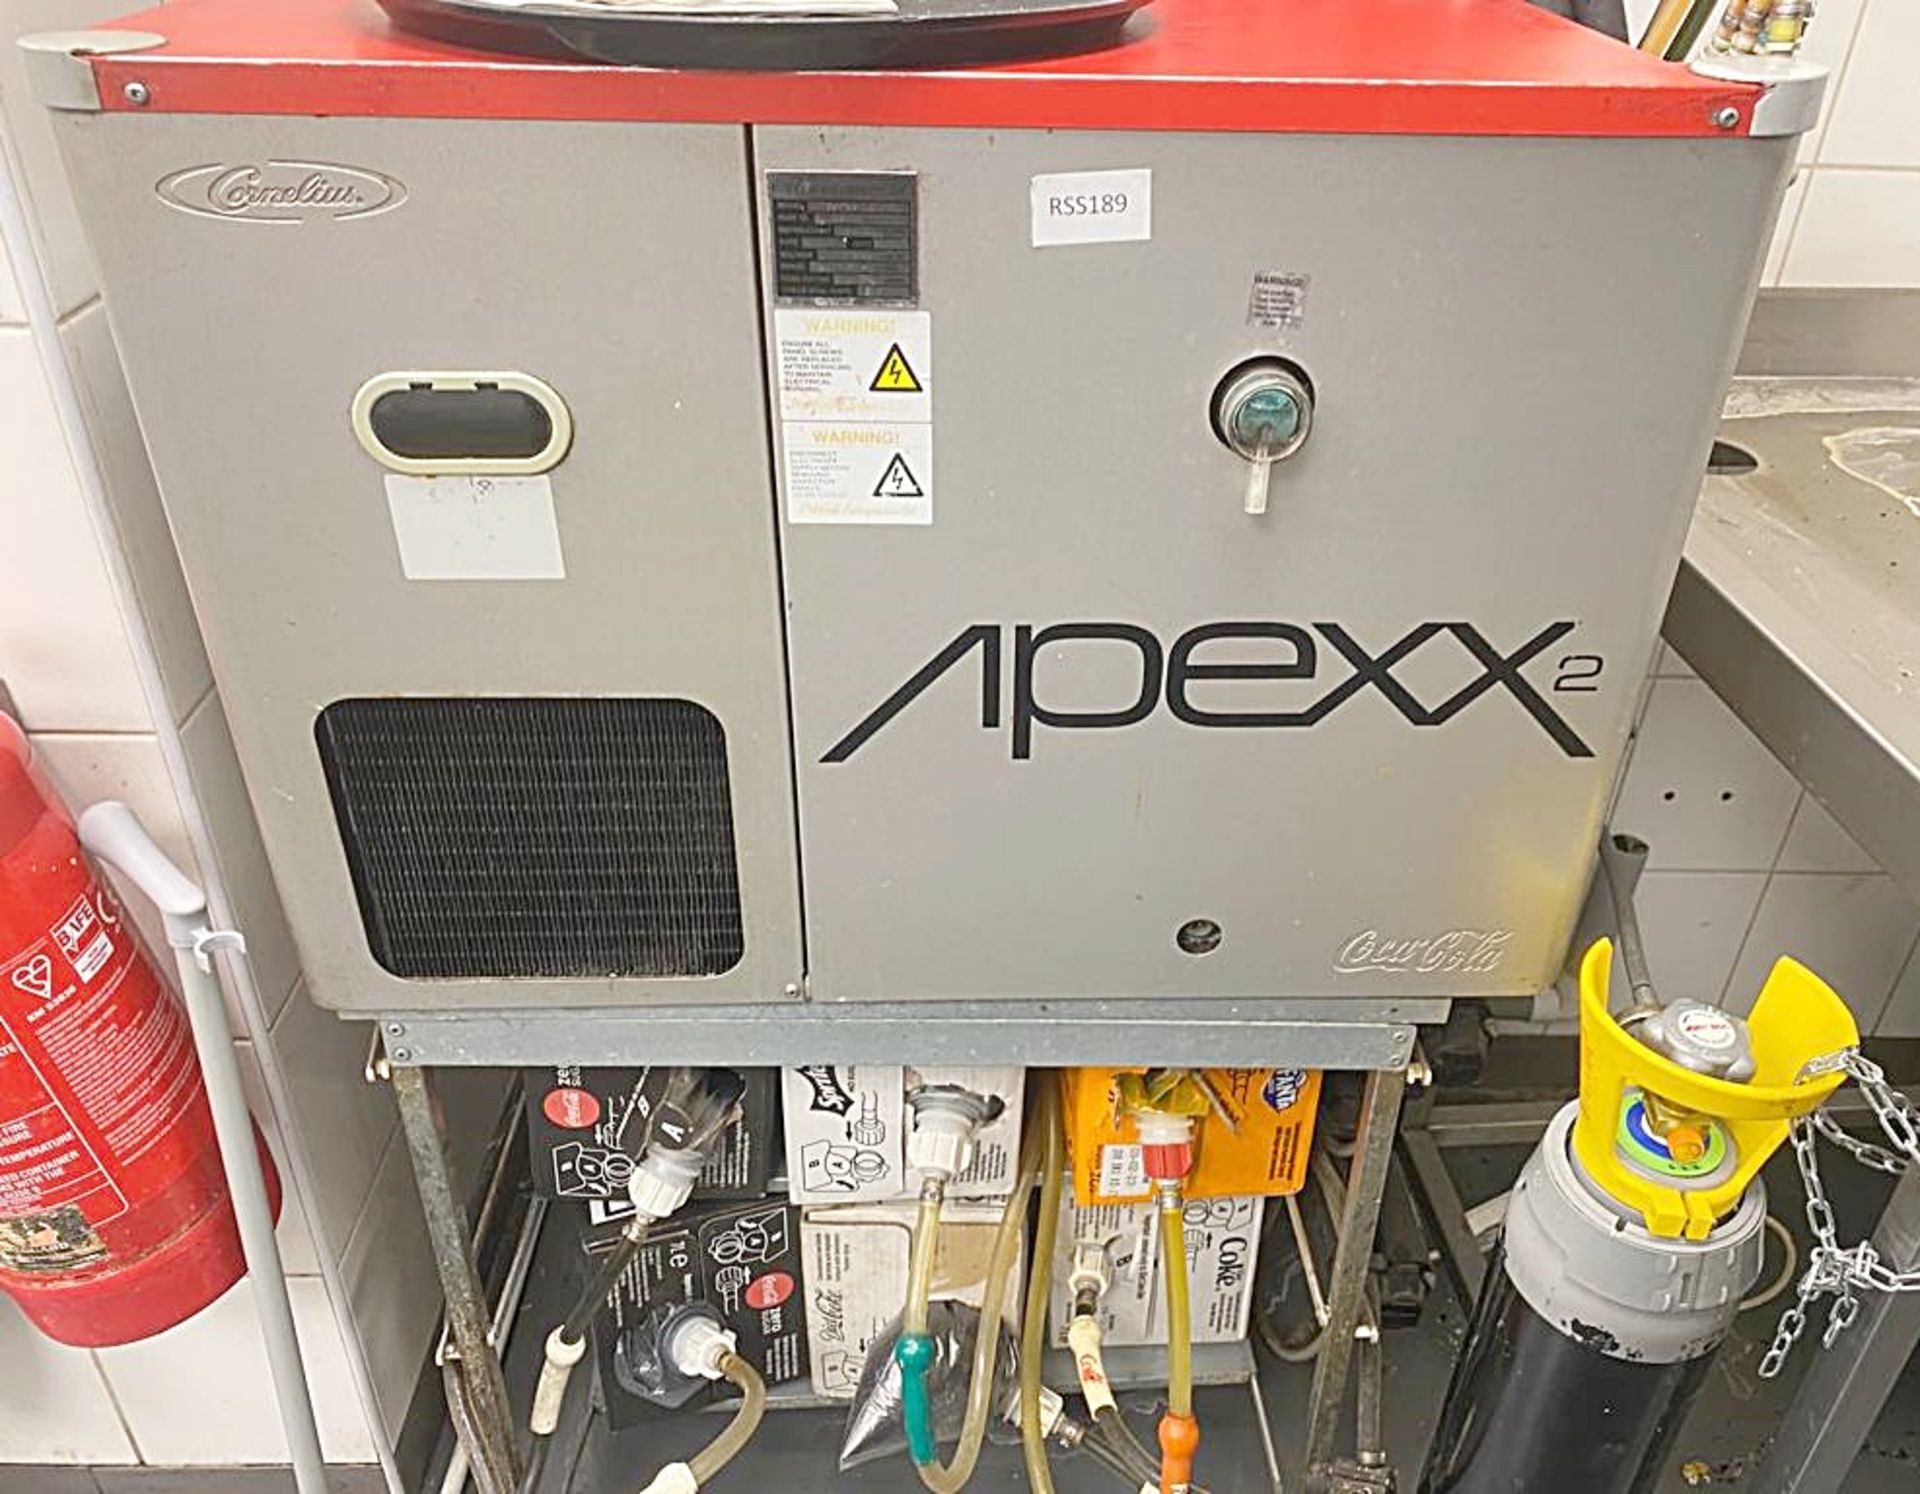 1 x Cornelius Apex Two Post Mix Drinks System With Dispenser Head As Shown , Full Working Order - - Image 4 of 4